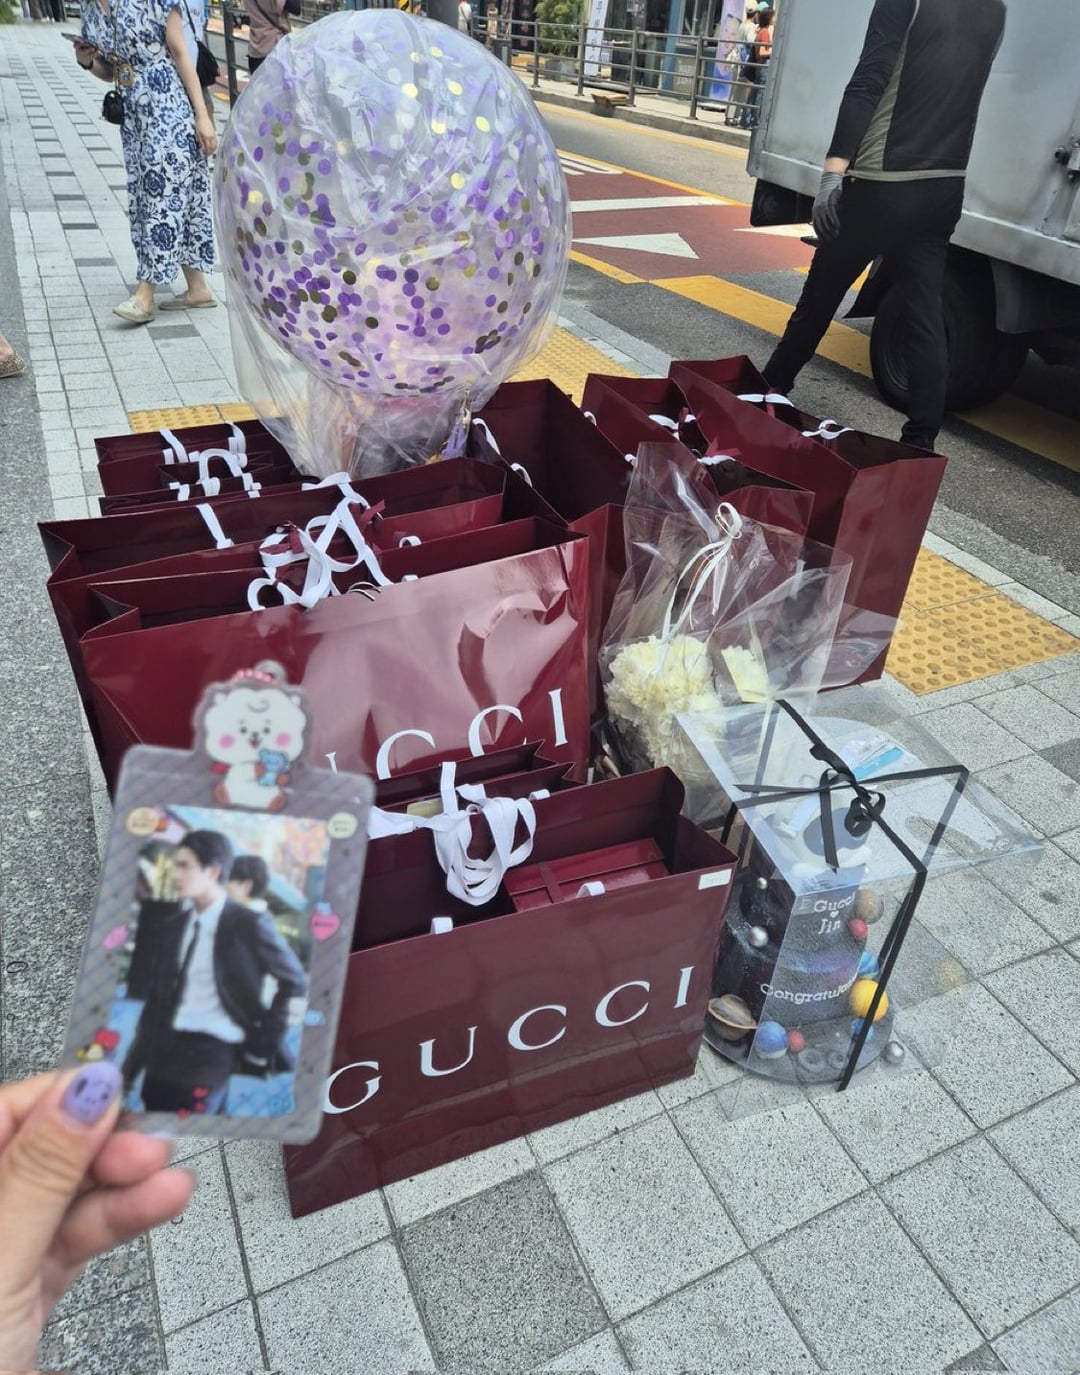 Army spots gifts from Gucci celebrating Jin's release